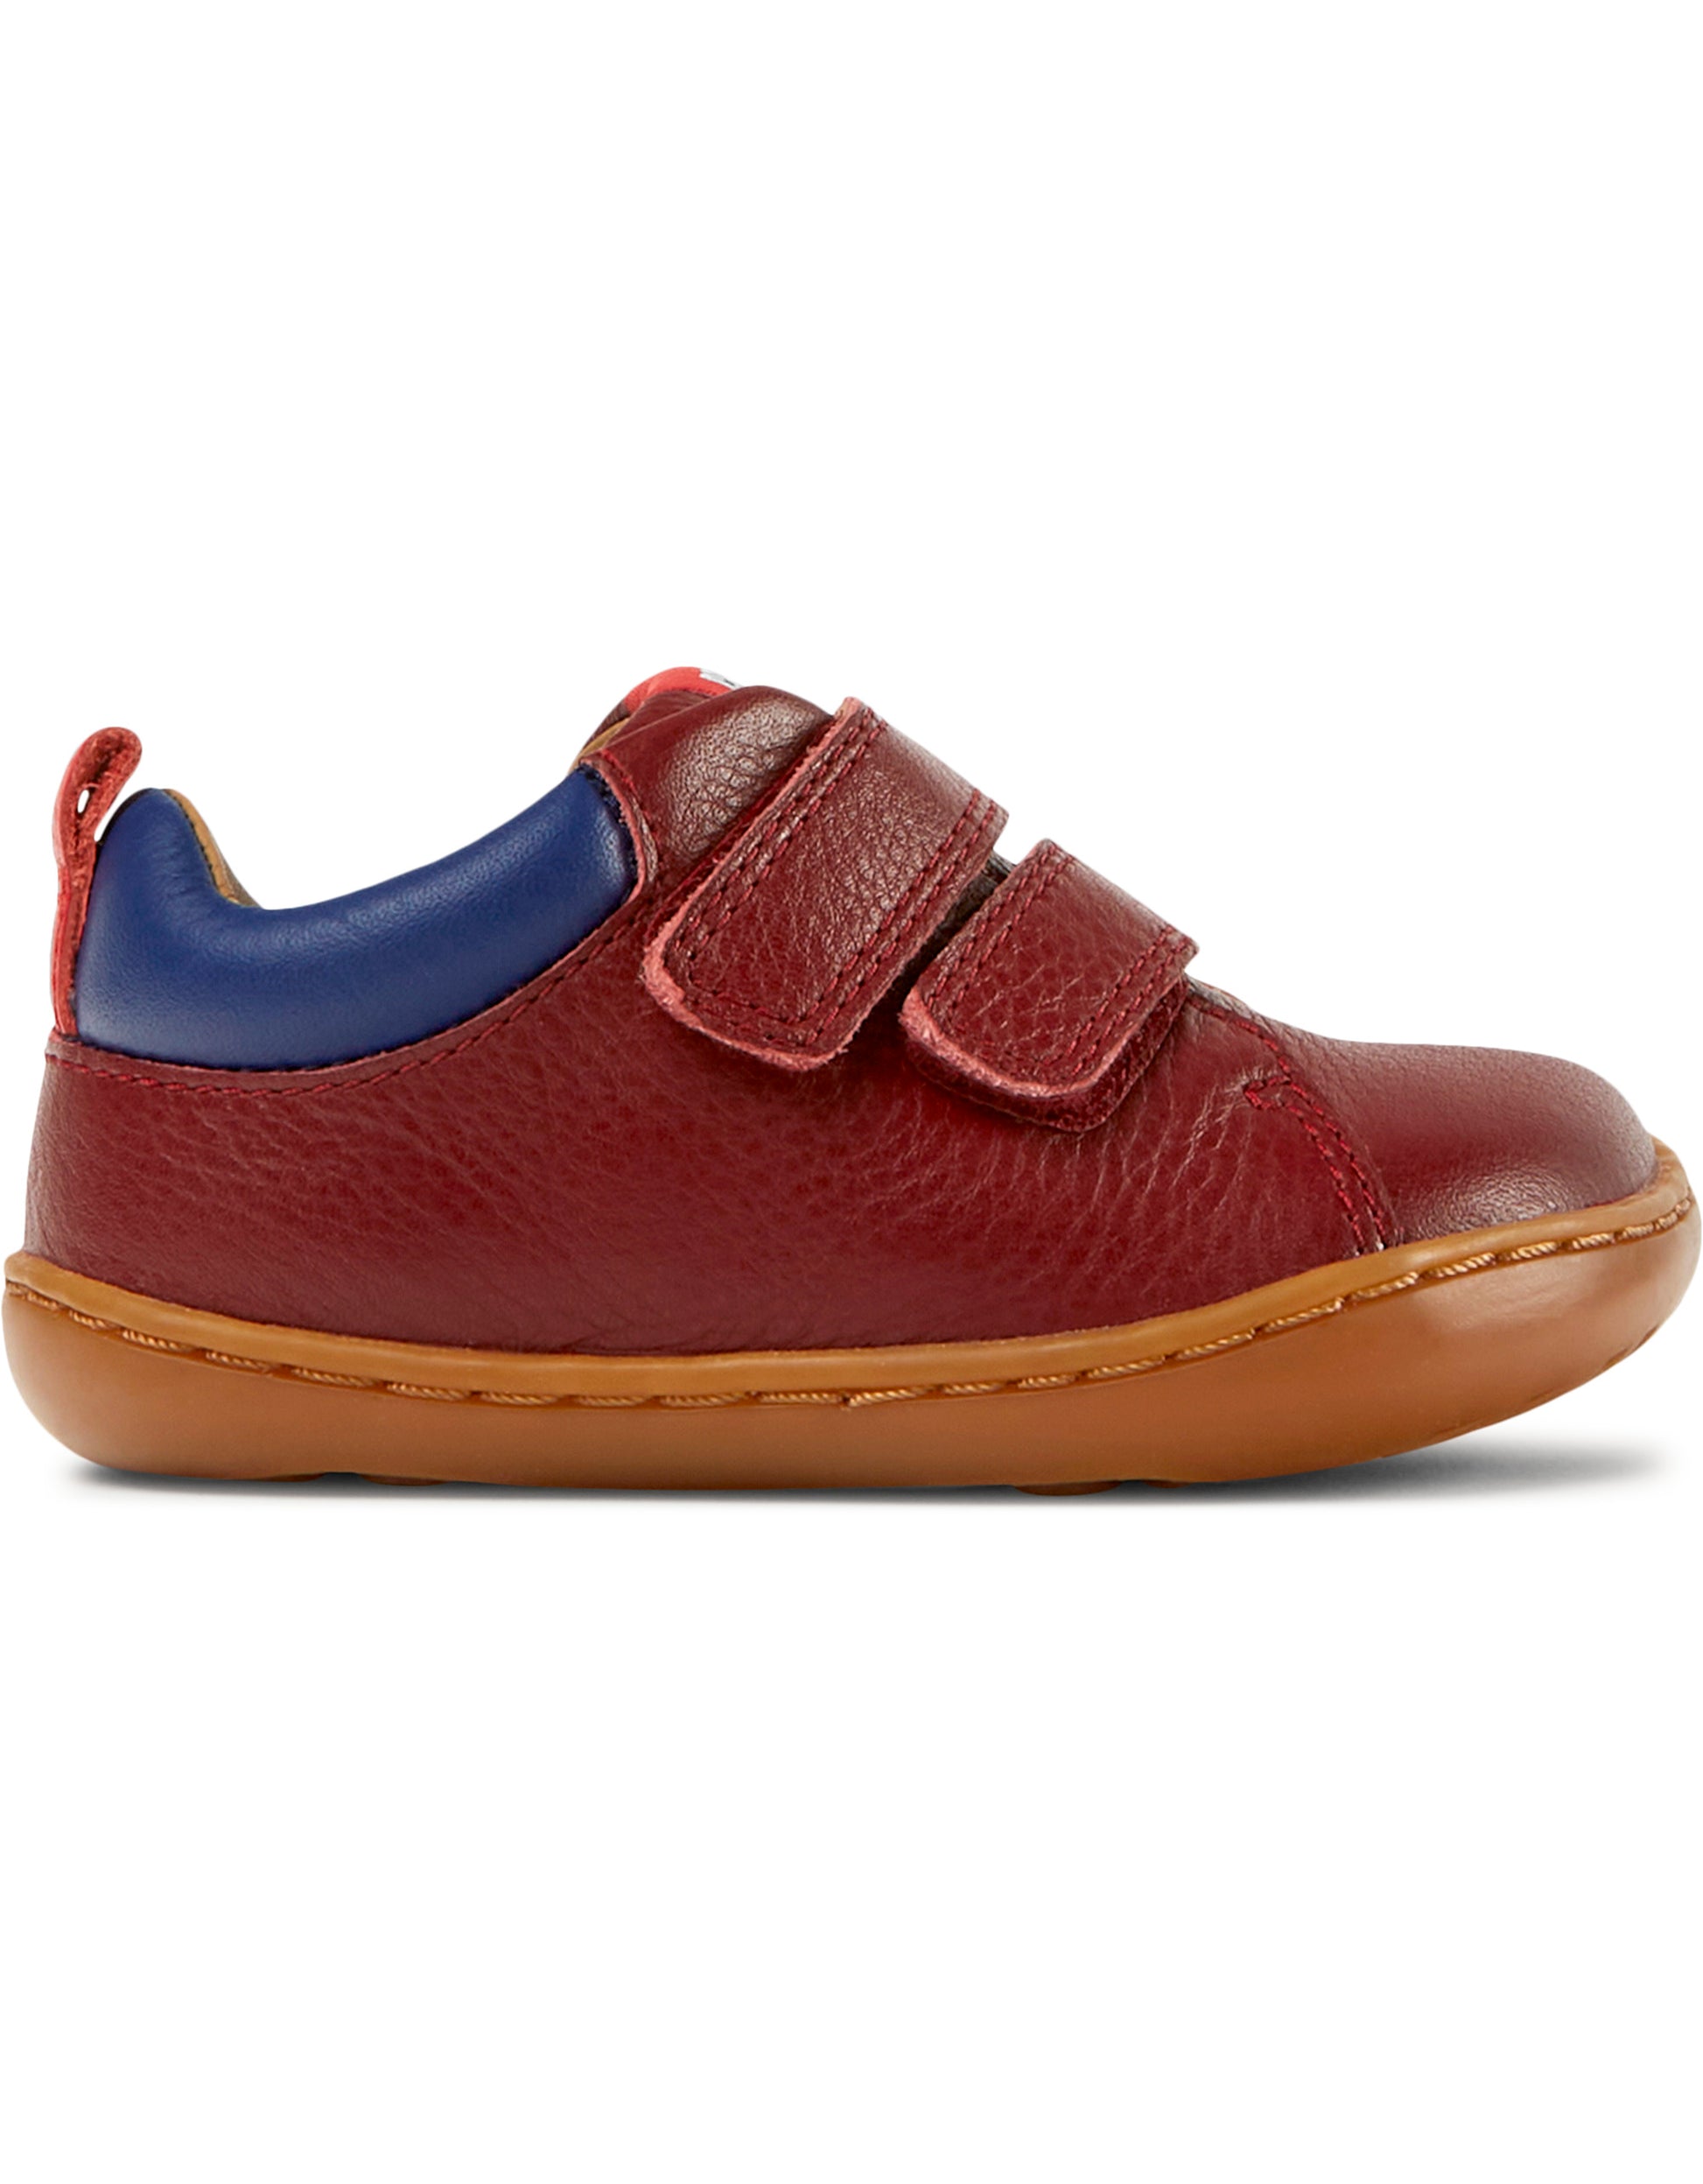 A boys casual shoe by Camper, style K800405-019, Peu Cami FW, in Burgundy Leather, with velcro fastening. Right Side view.